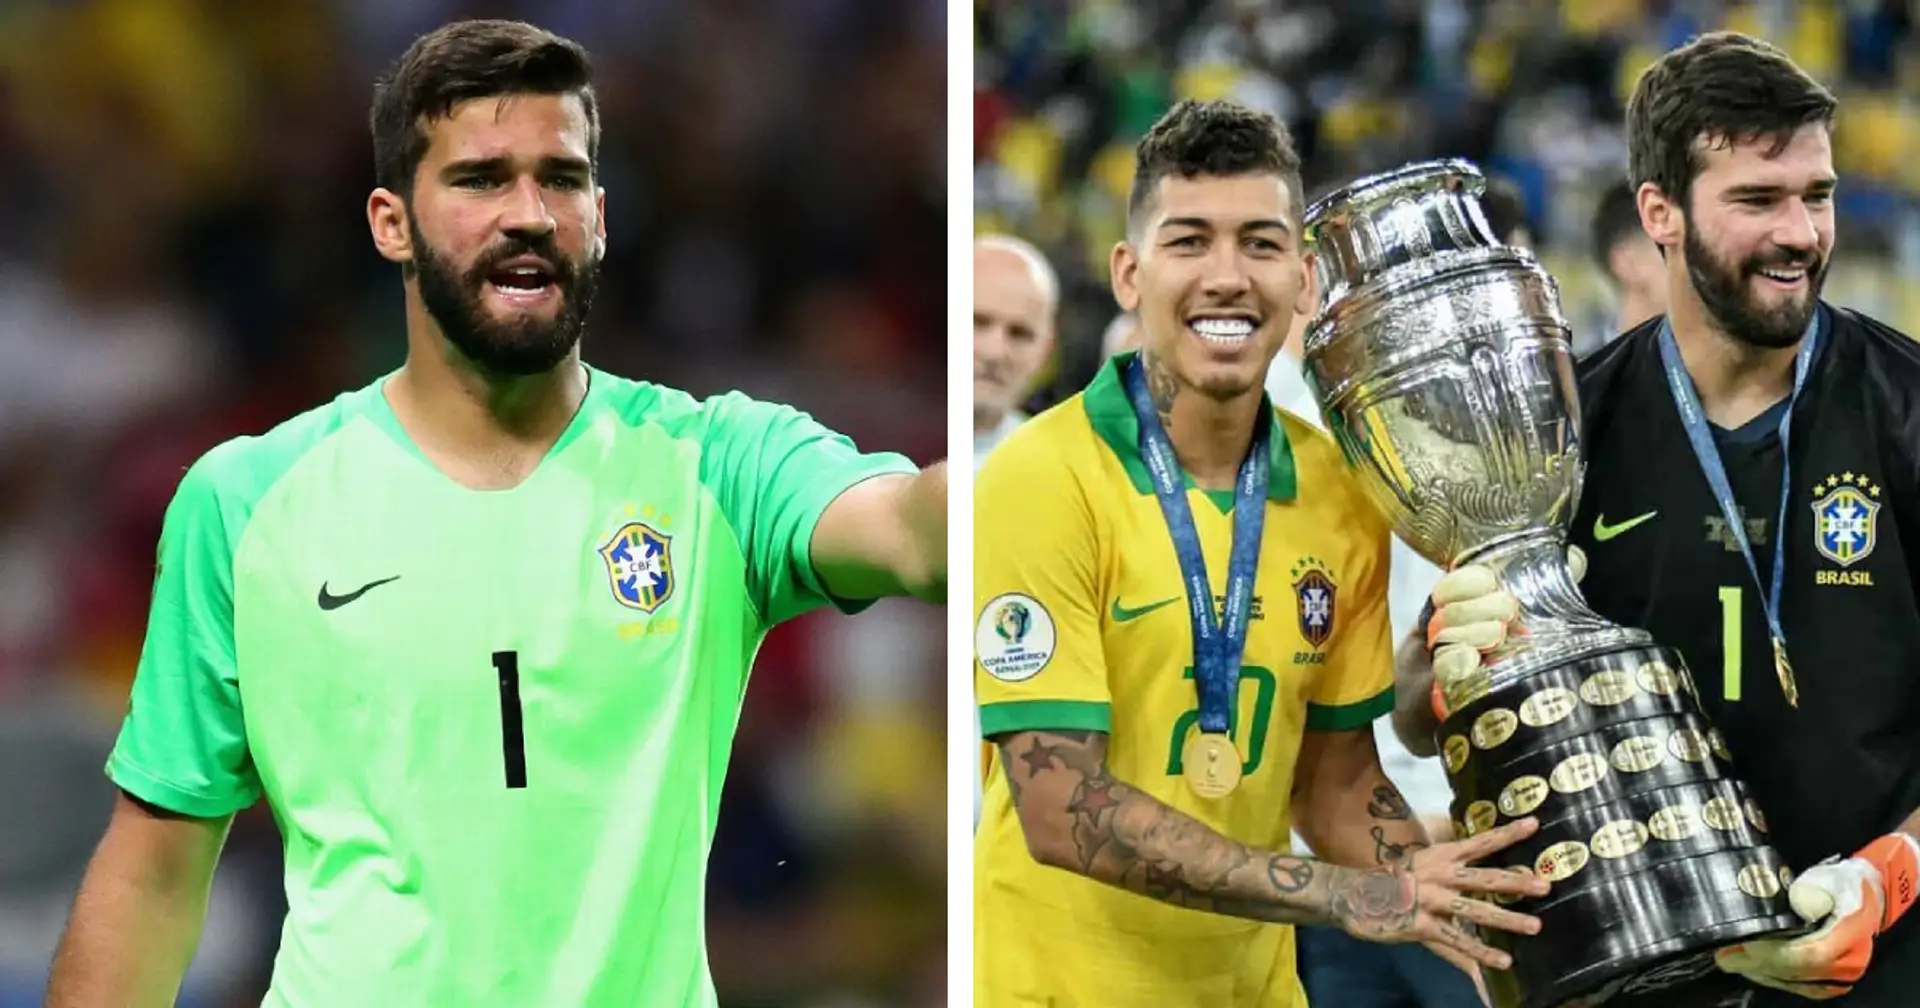 Alisson, Fabinho and Firmino reportedly set to miss Copa America, could be ready for LFC pre-season